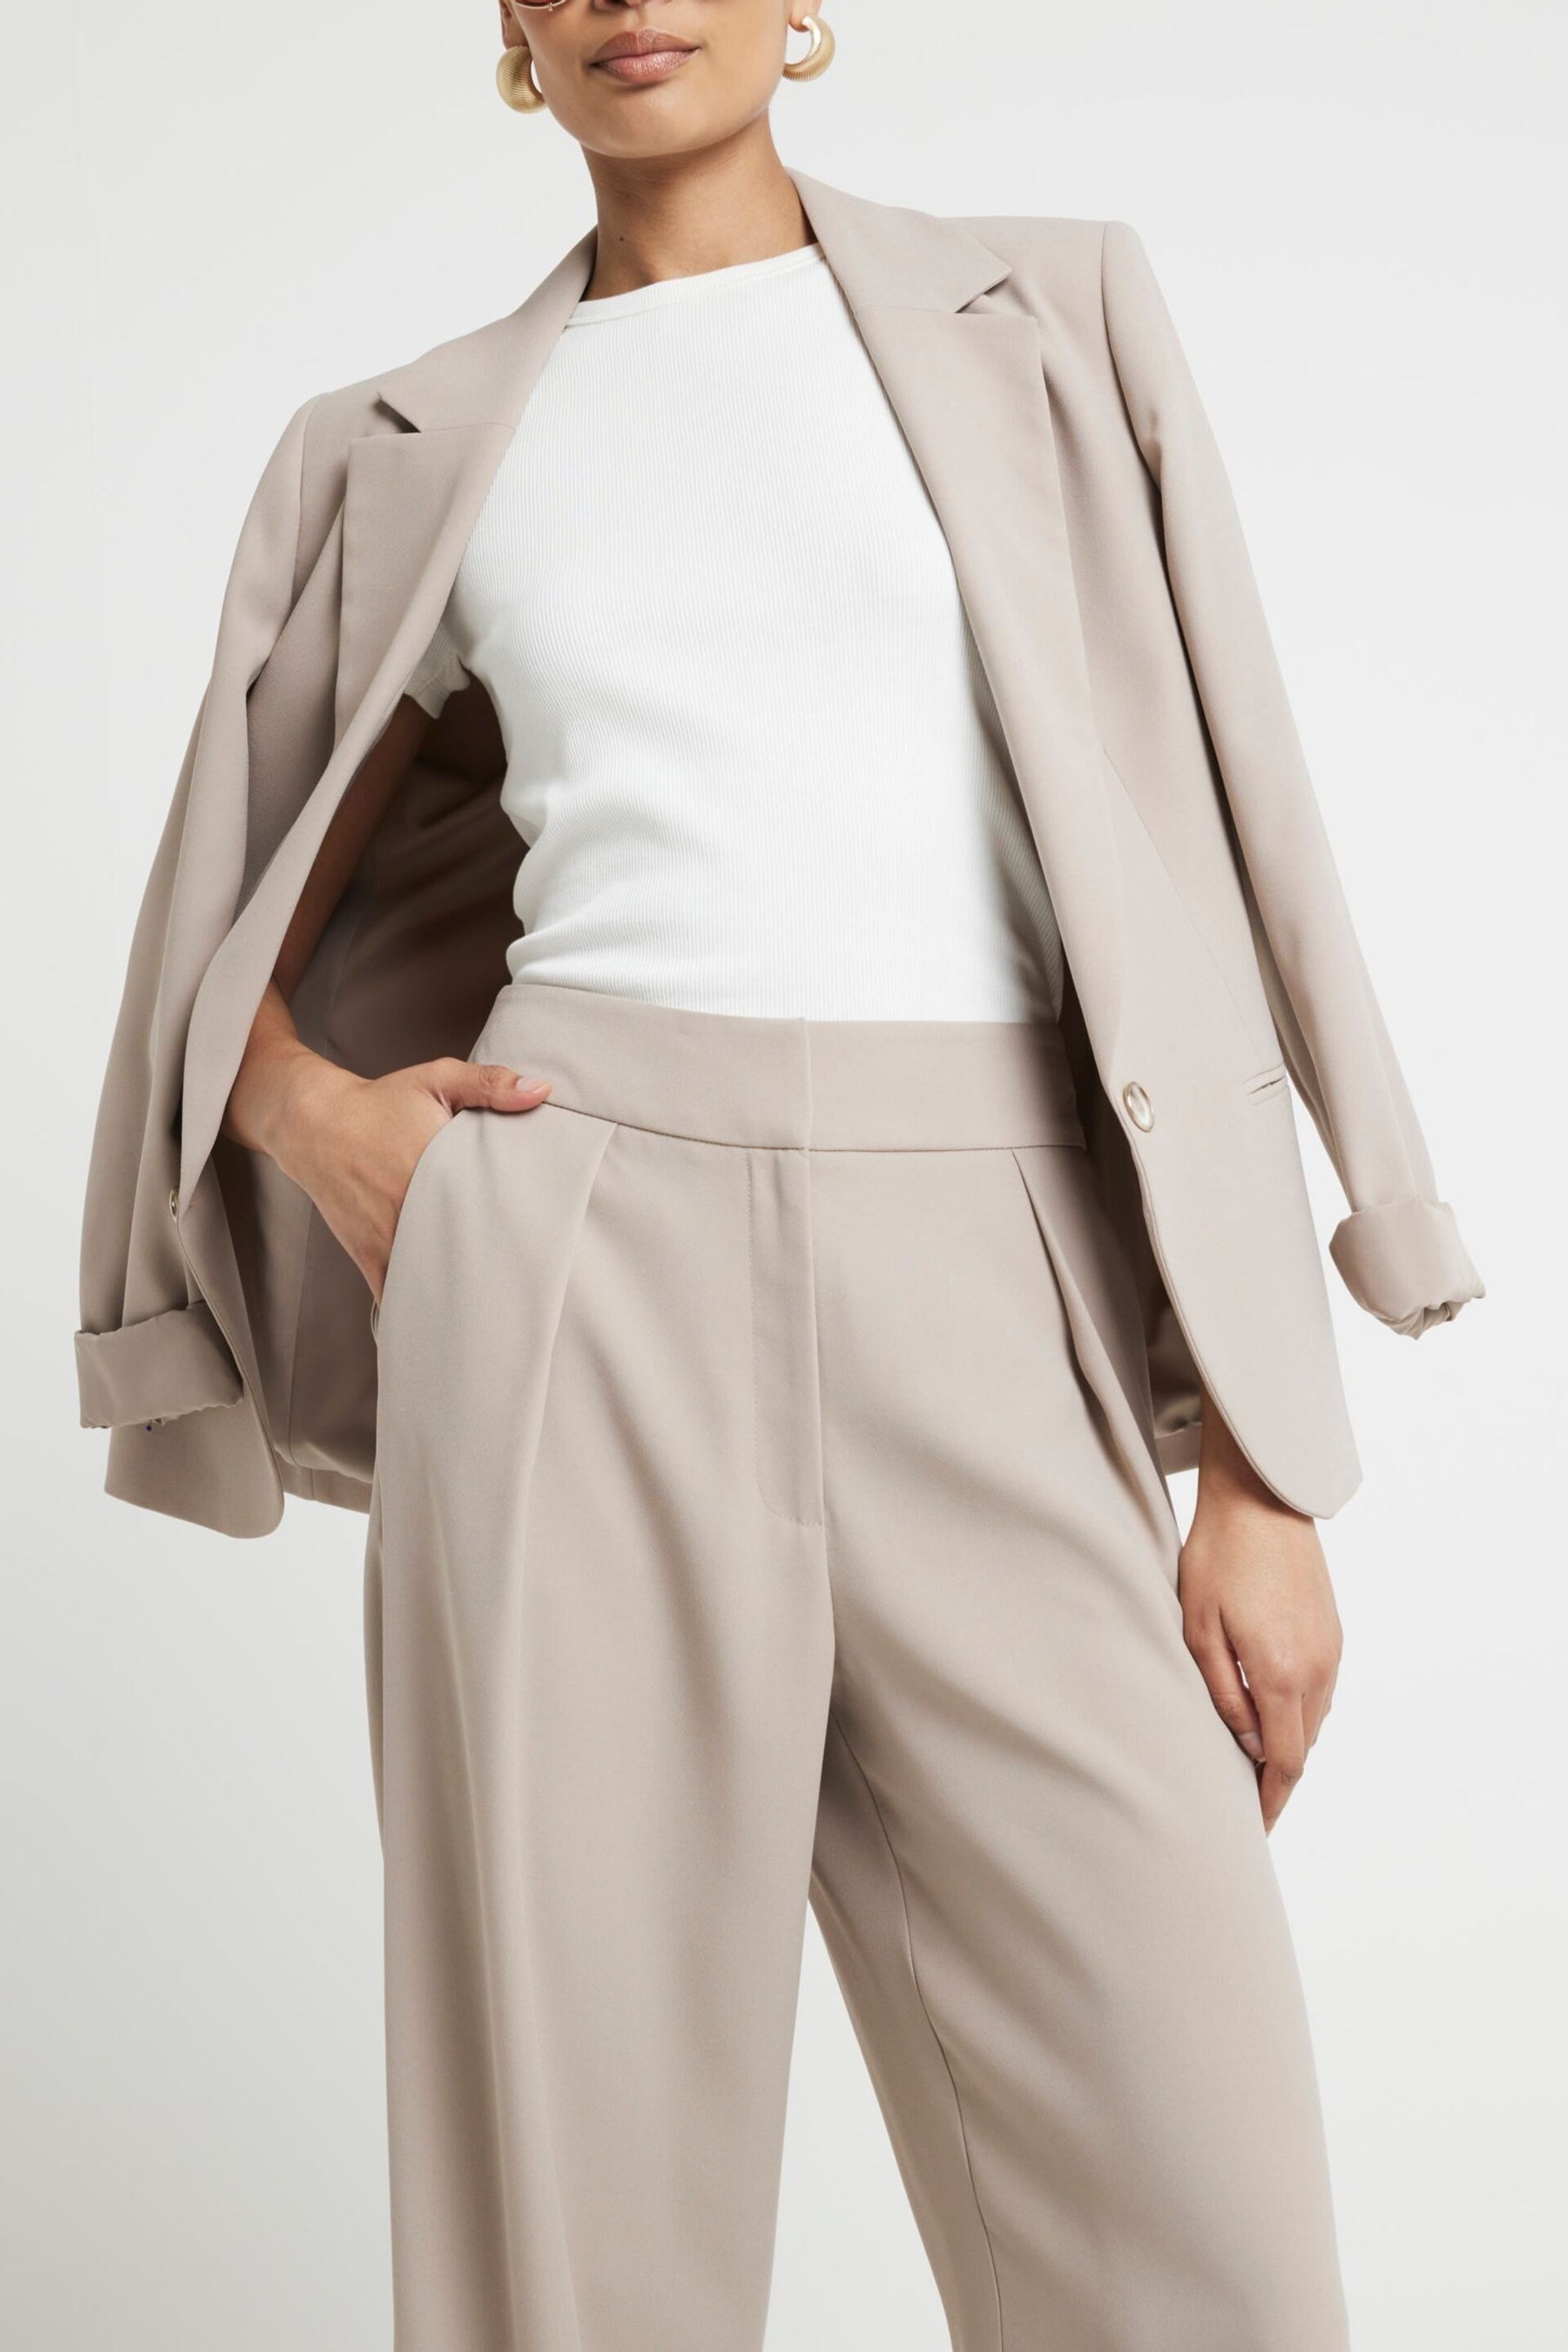 River Island Beige Wide Leg Pleated Tailored Trousers - Image 4 of 6